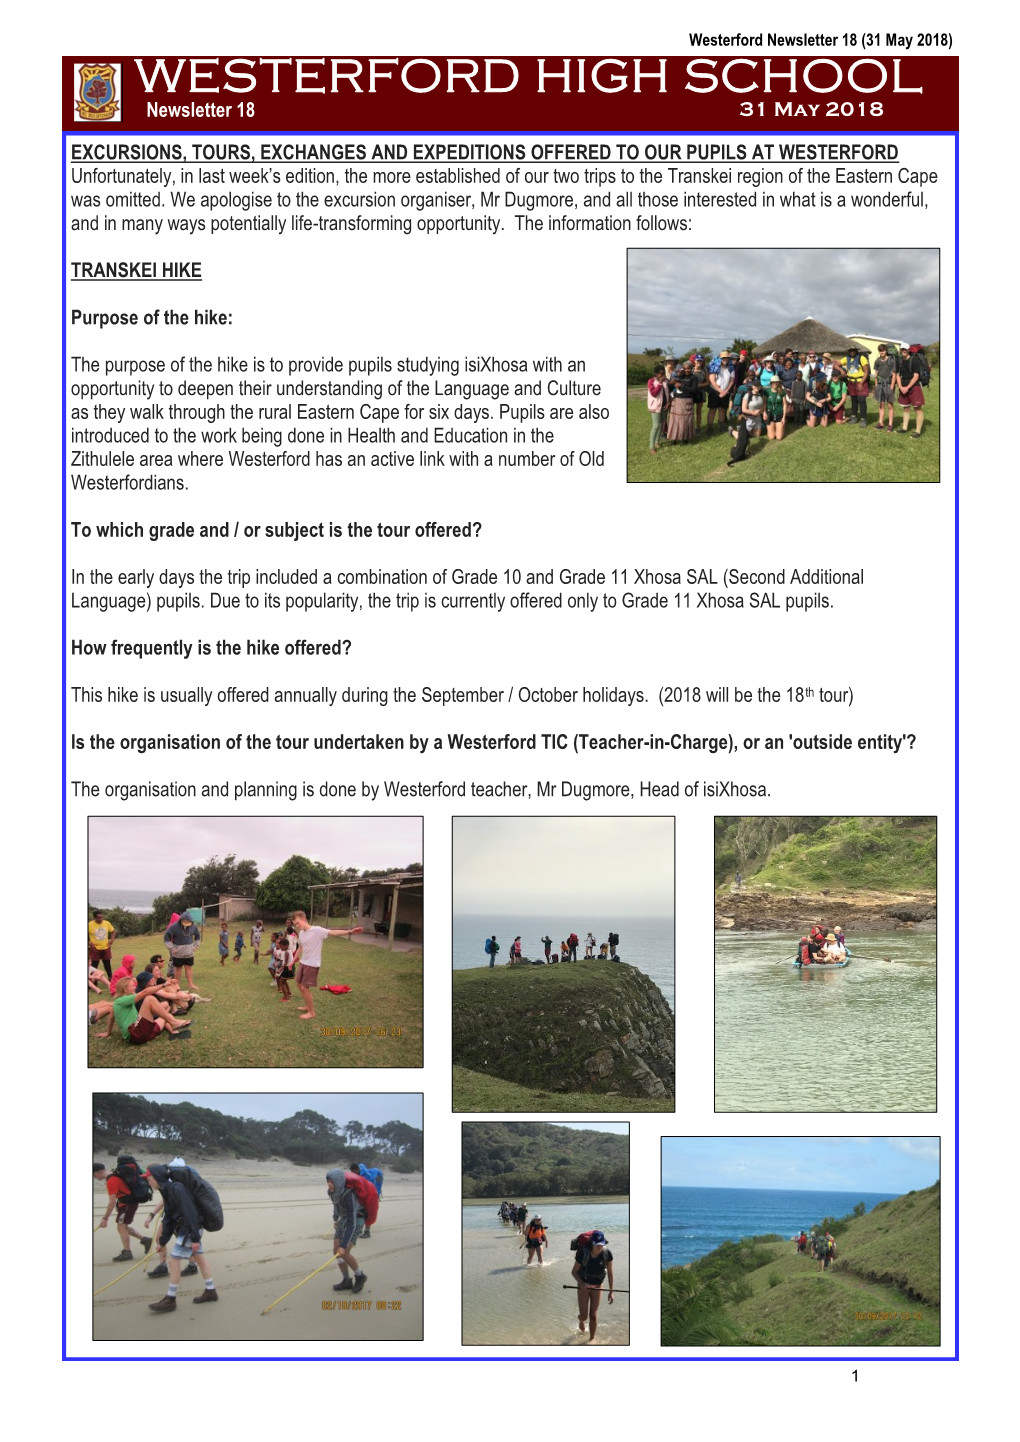 WESTERFORD HIGH SCHOOL Newsletter 18 31 May 2018